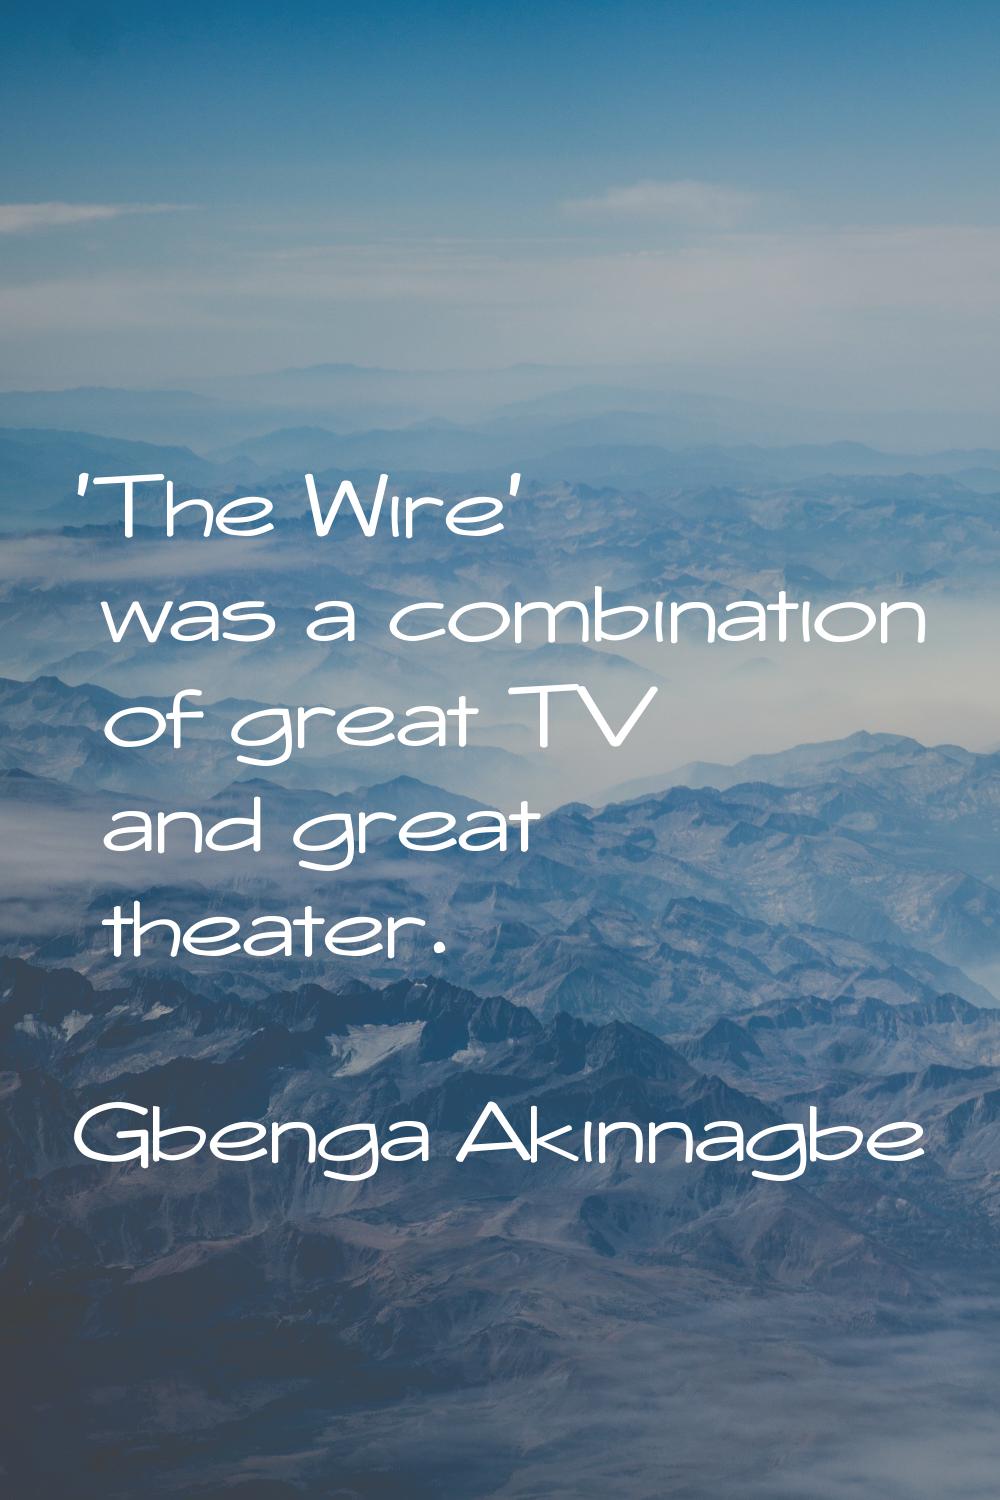 'The Wire' was a combination of great TV and great theater.